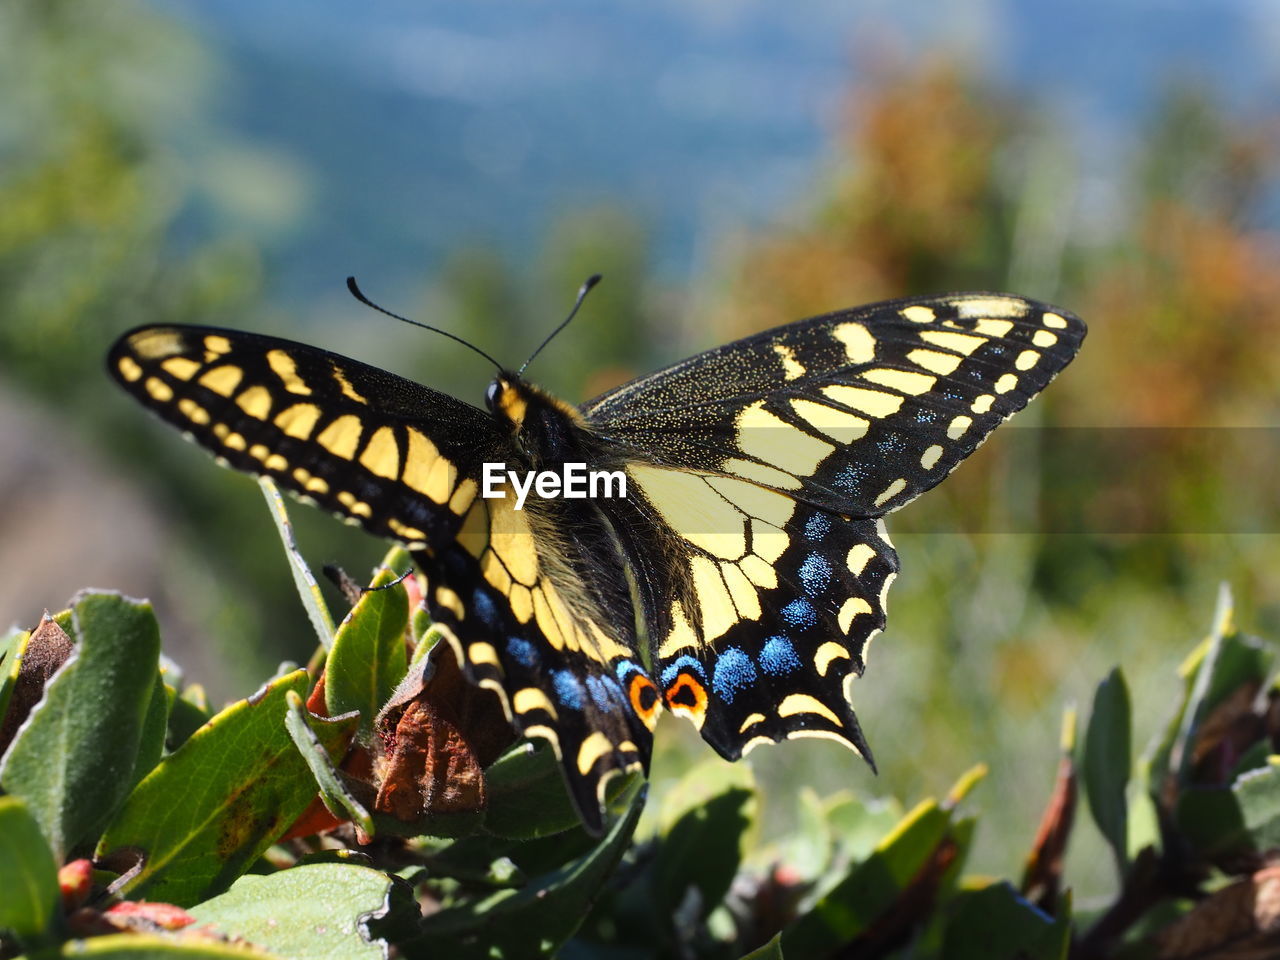 Close-up of anise swallowtail butterfly on plant